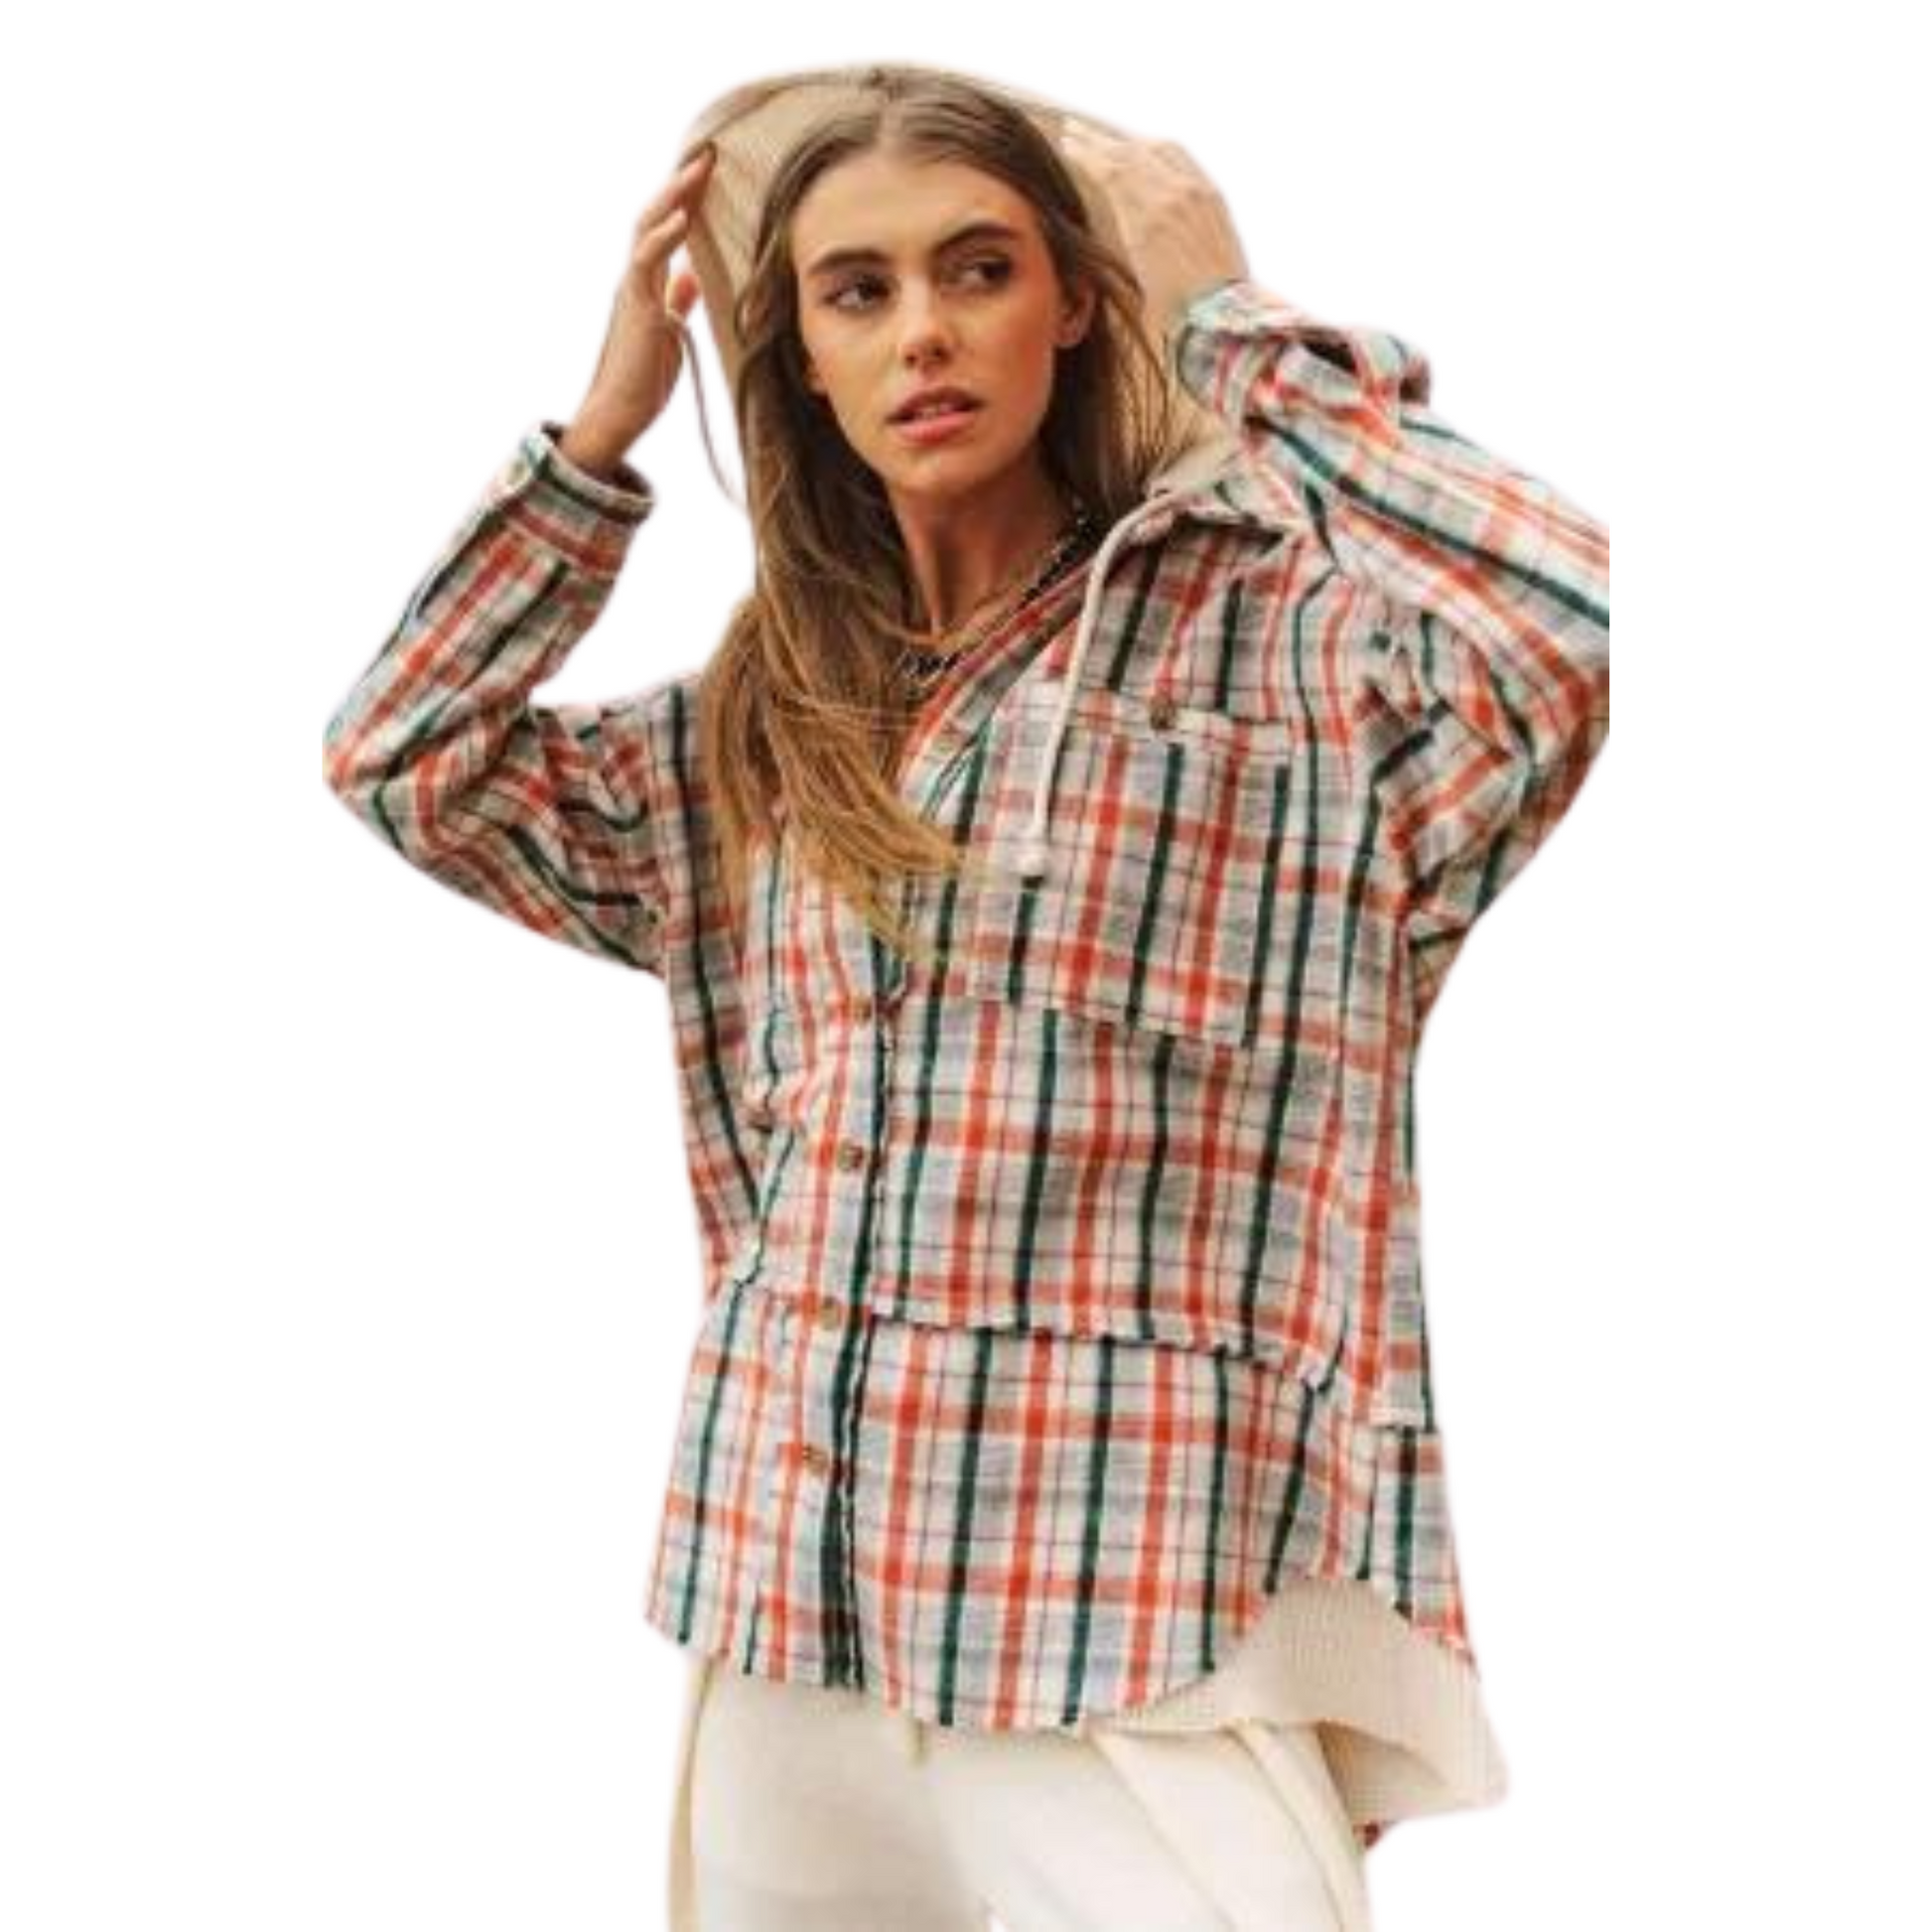 Cozy up in this Fuzzy Plaid Color Block Top! Boasting a classic plaid pattern featuring fall colors, this button-down collared top has all the right features for a stylish and comfortable look.